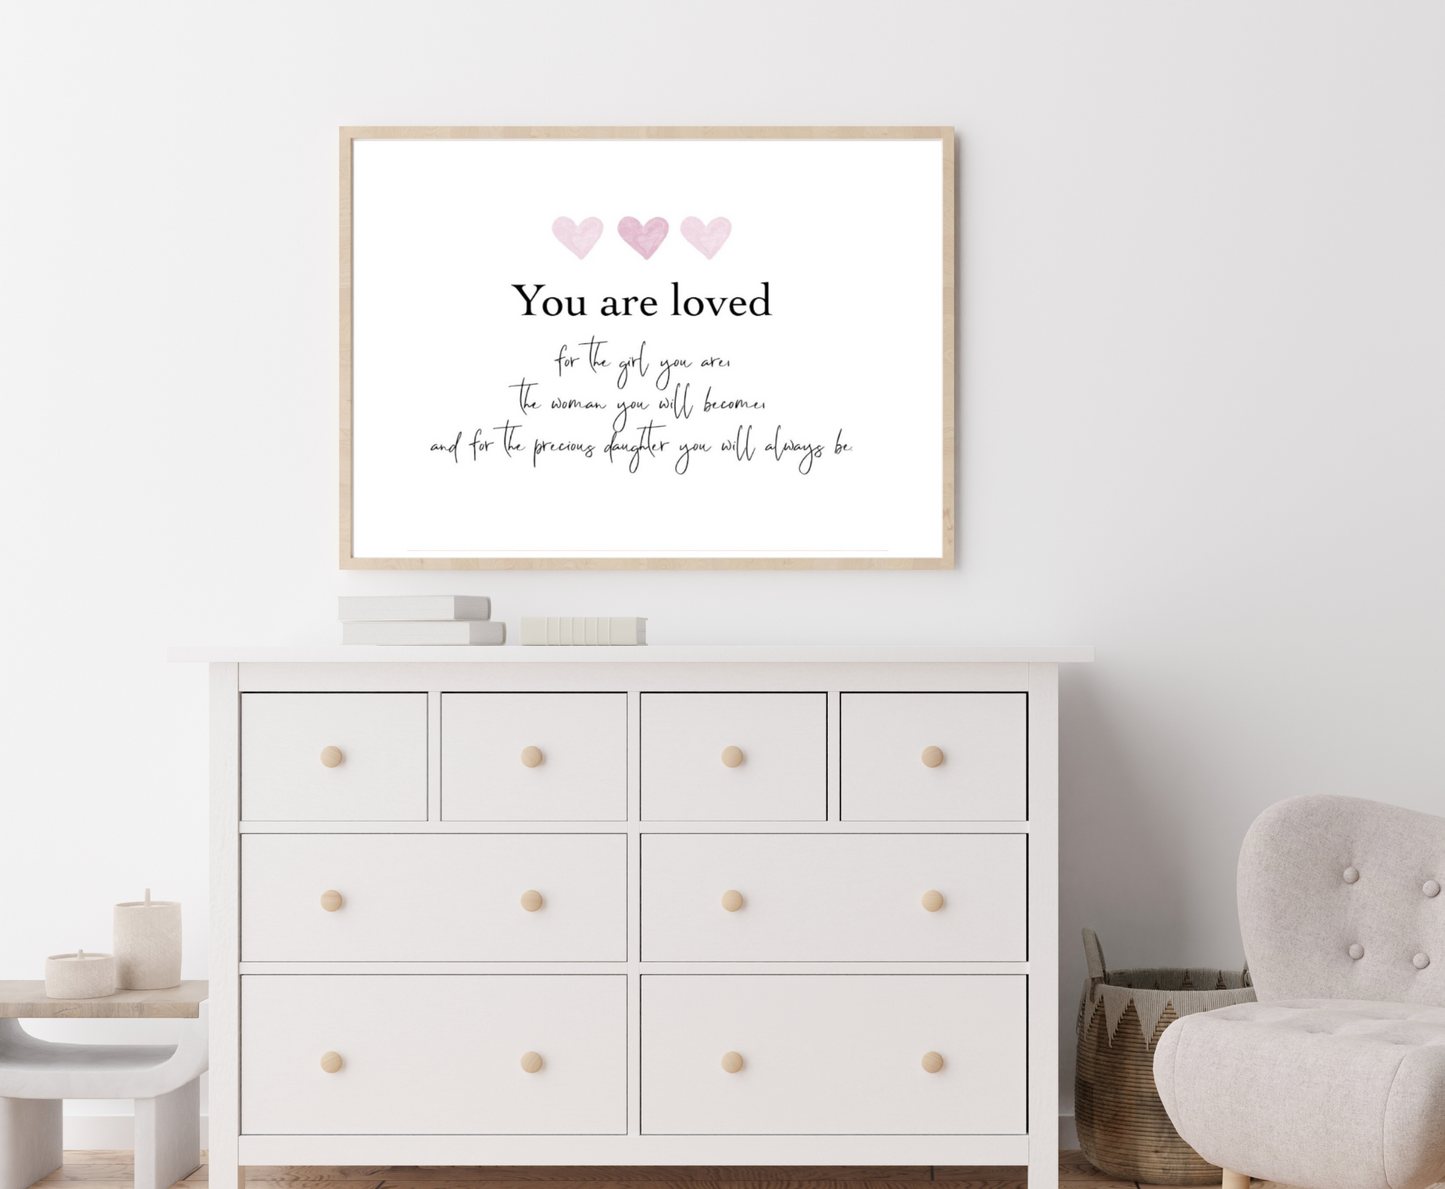 A picture showing a white dresser with a little girl’s graphic hanging on the wall right above the latter. The graphic is showing three pink hearts with a piece of writing below that says: You are loved for the girl you are, the woman you will become, and the precious daughter you will always be.